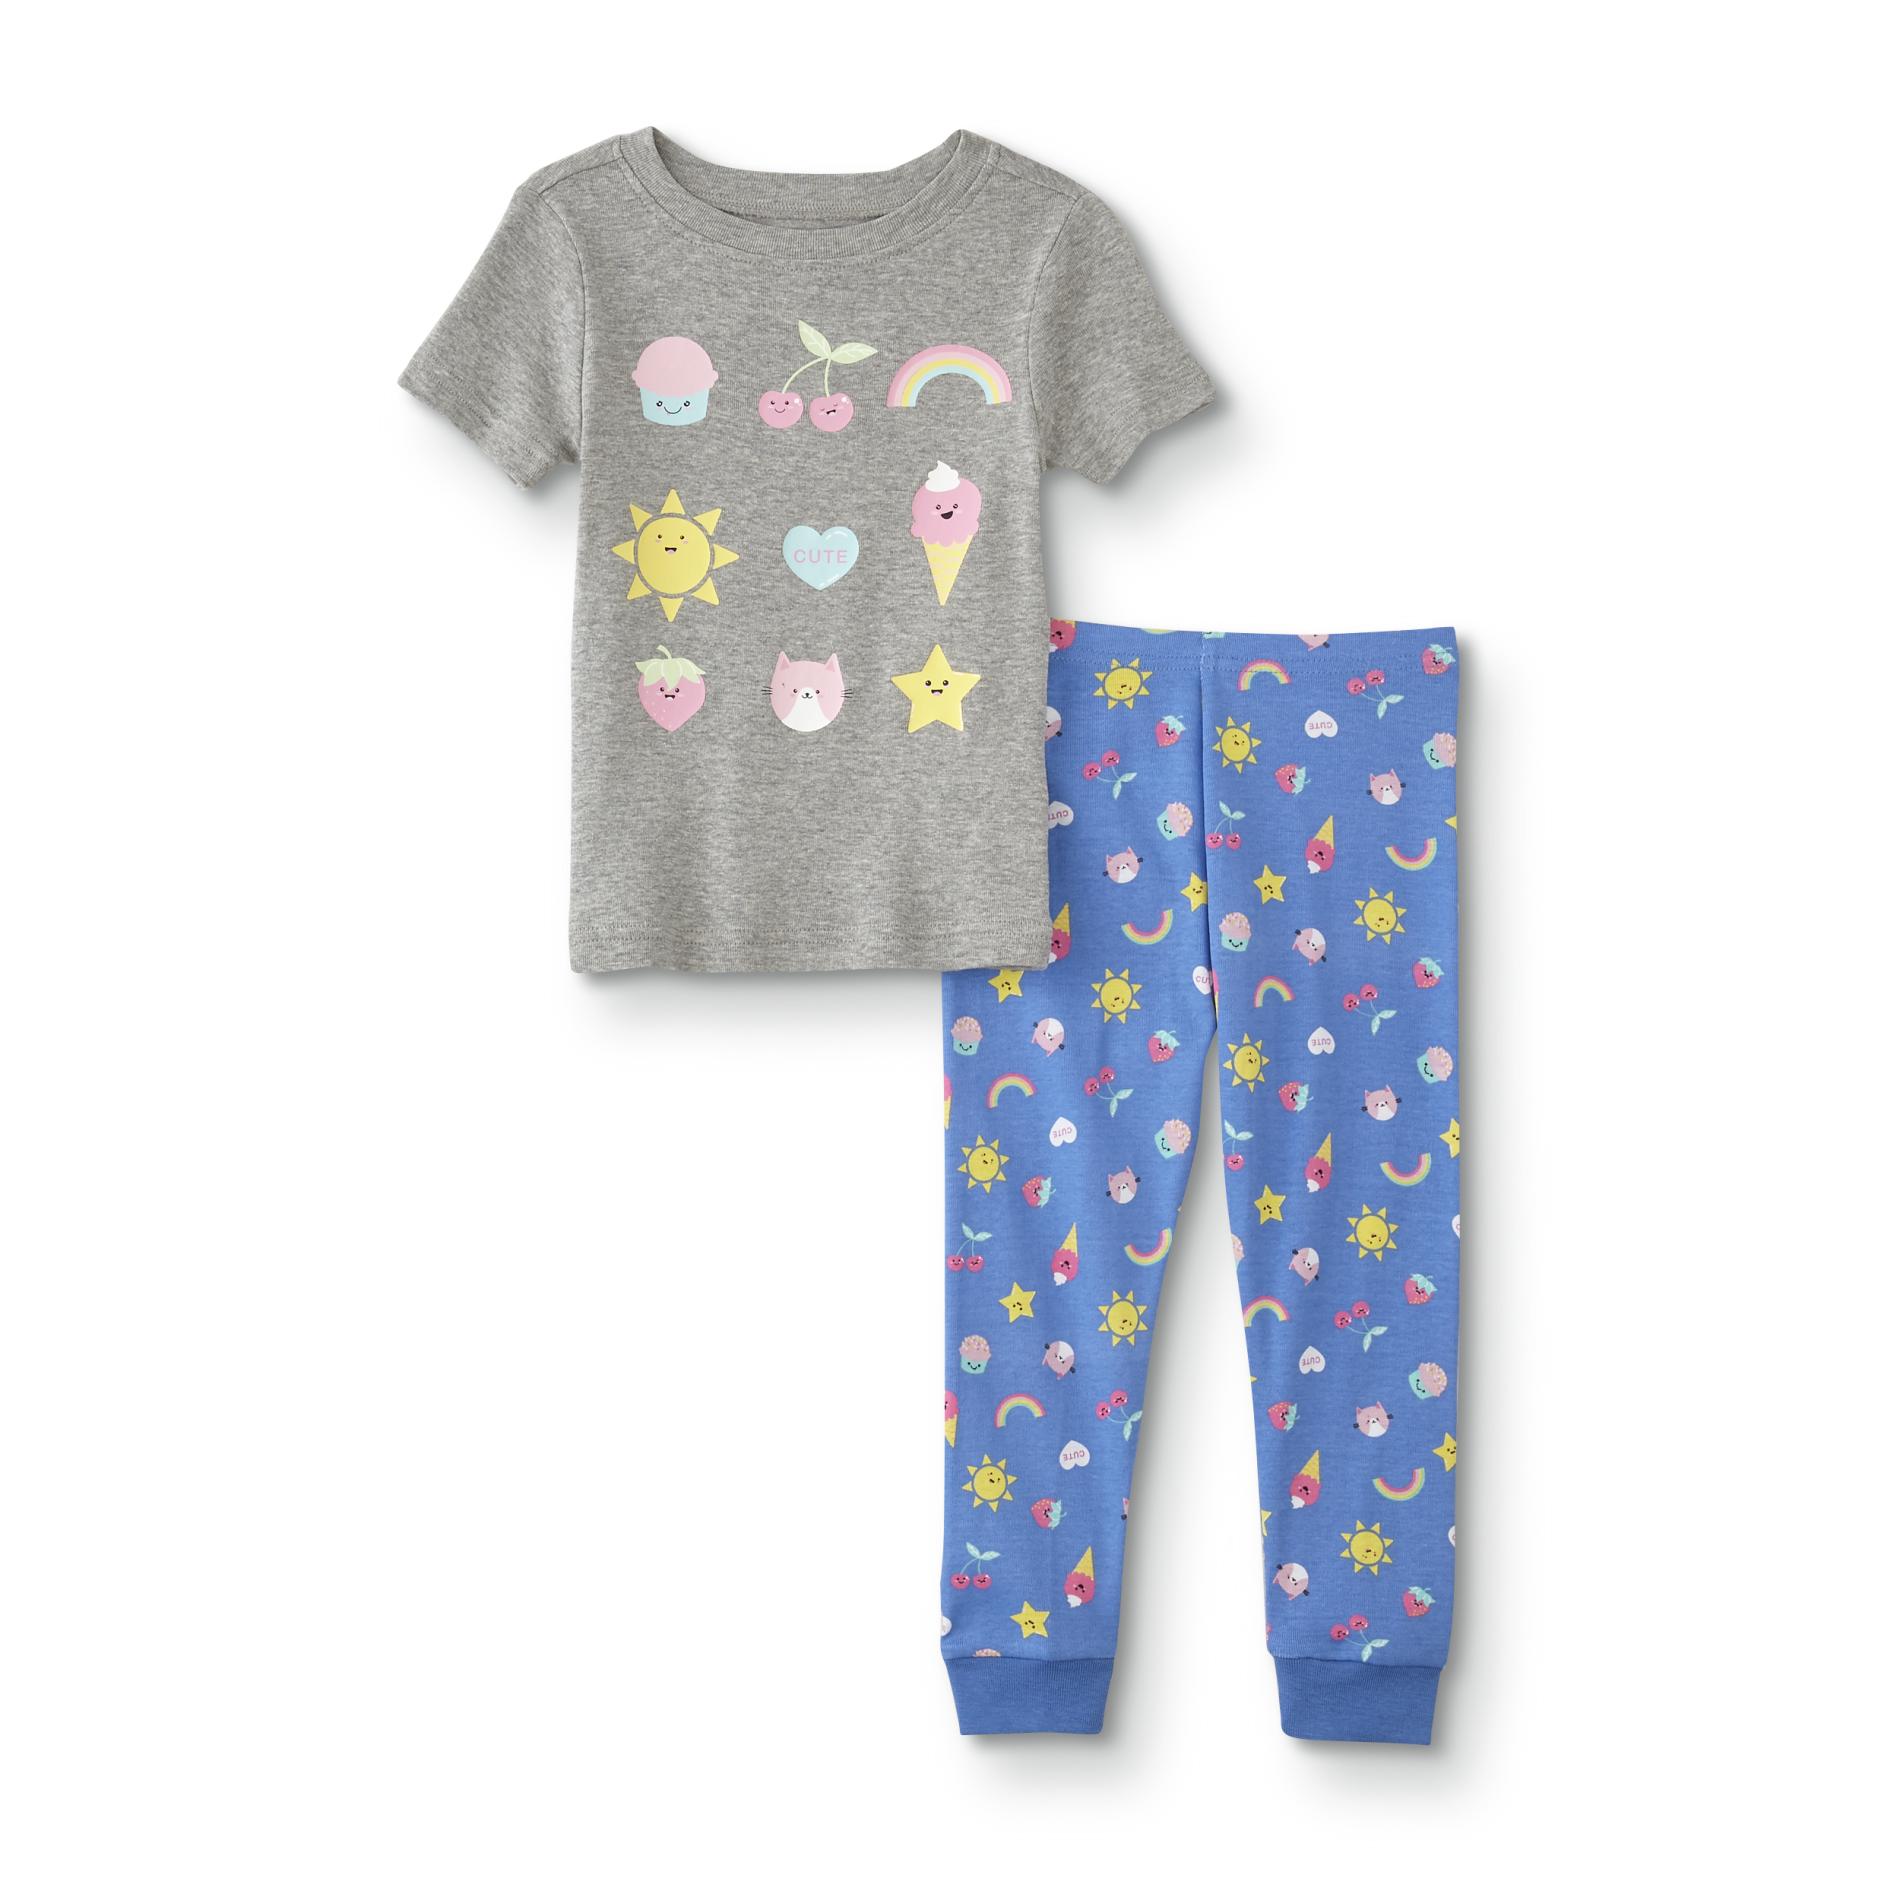 Simply Styled Infant & Toddler Girls' Pajama Shirt & Pants - Cute Fruit & Sweets